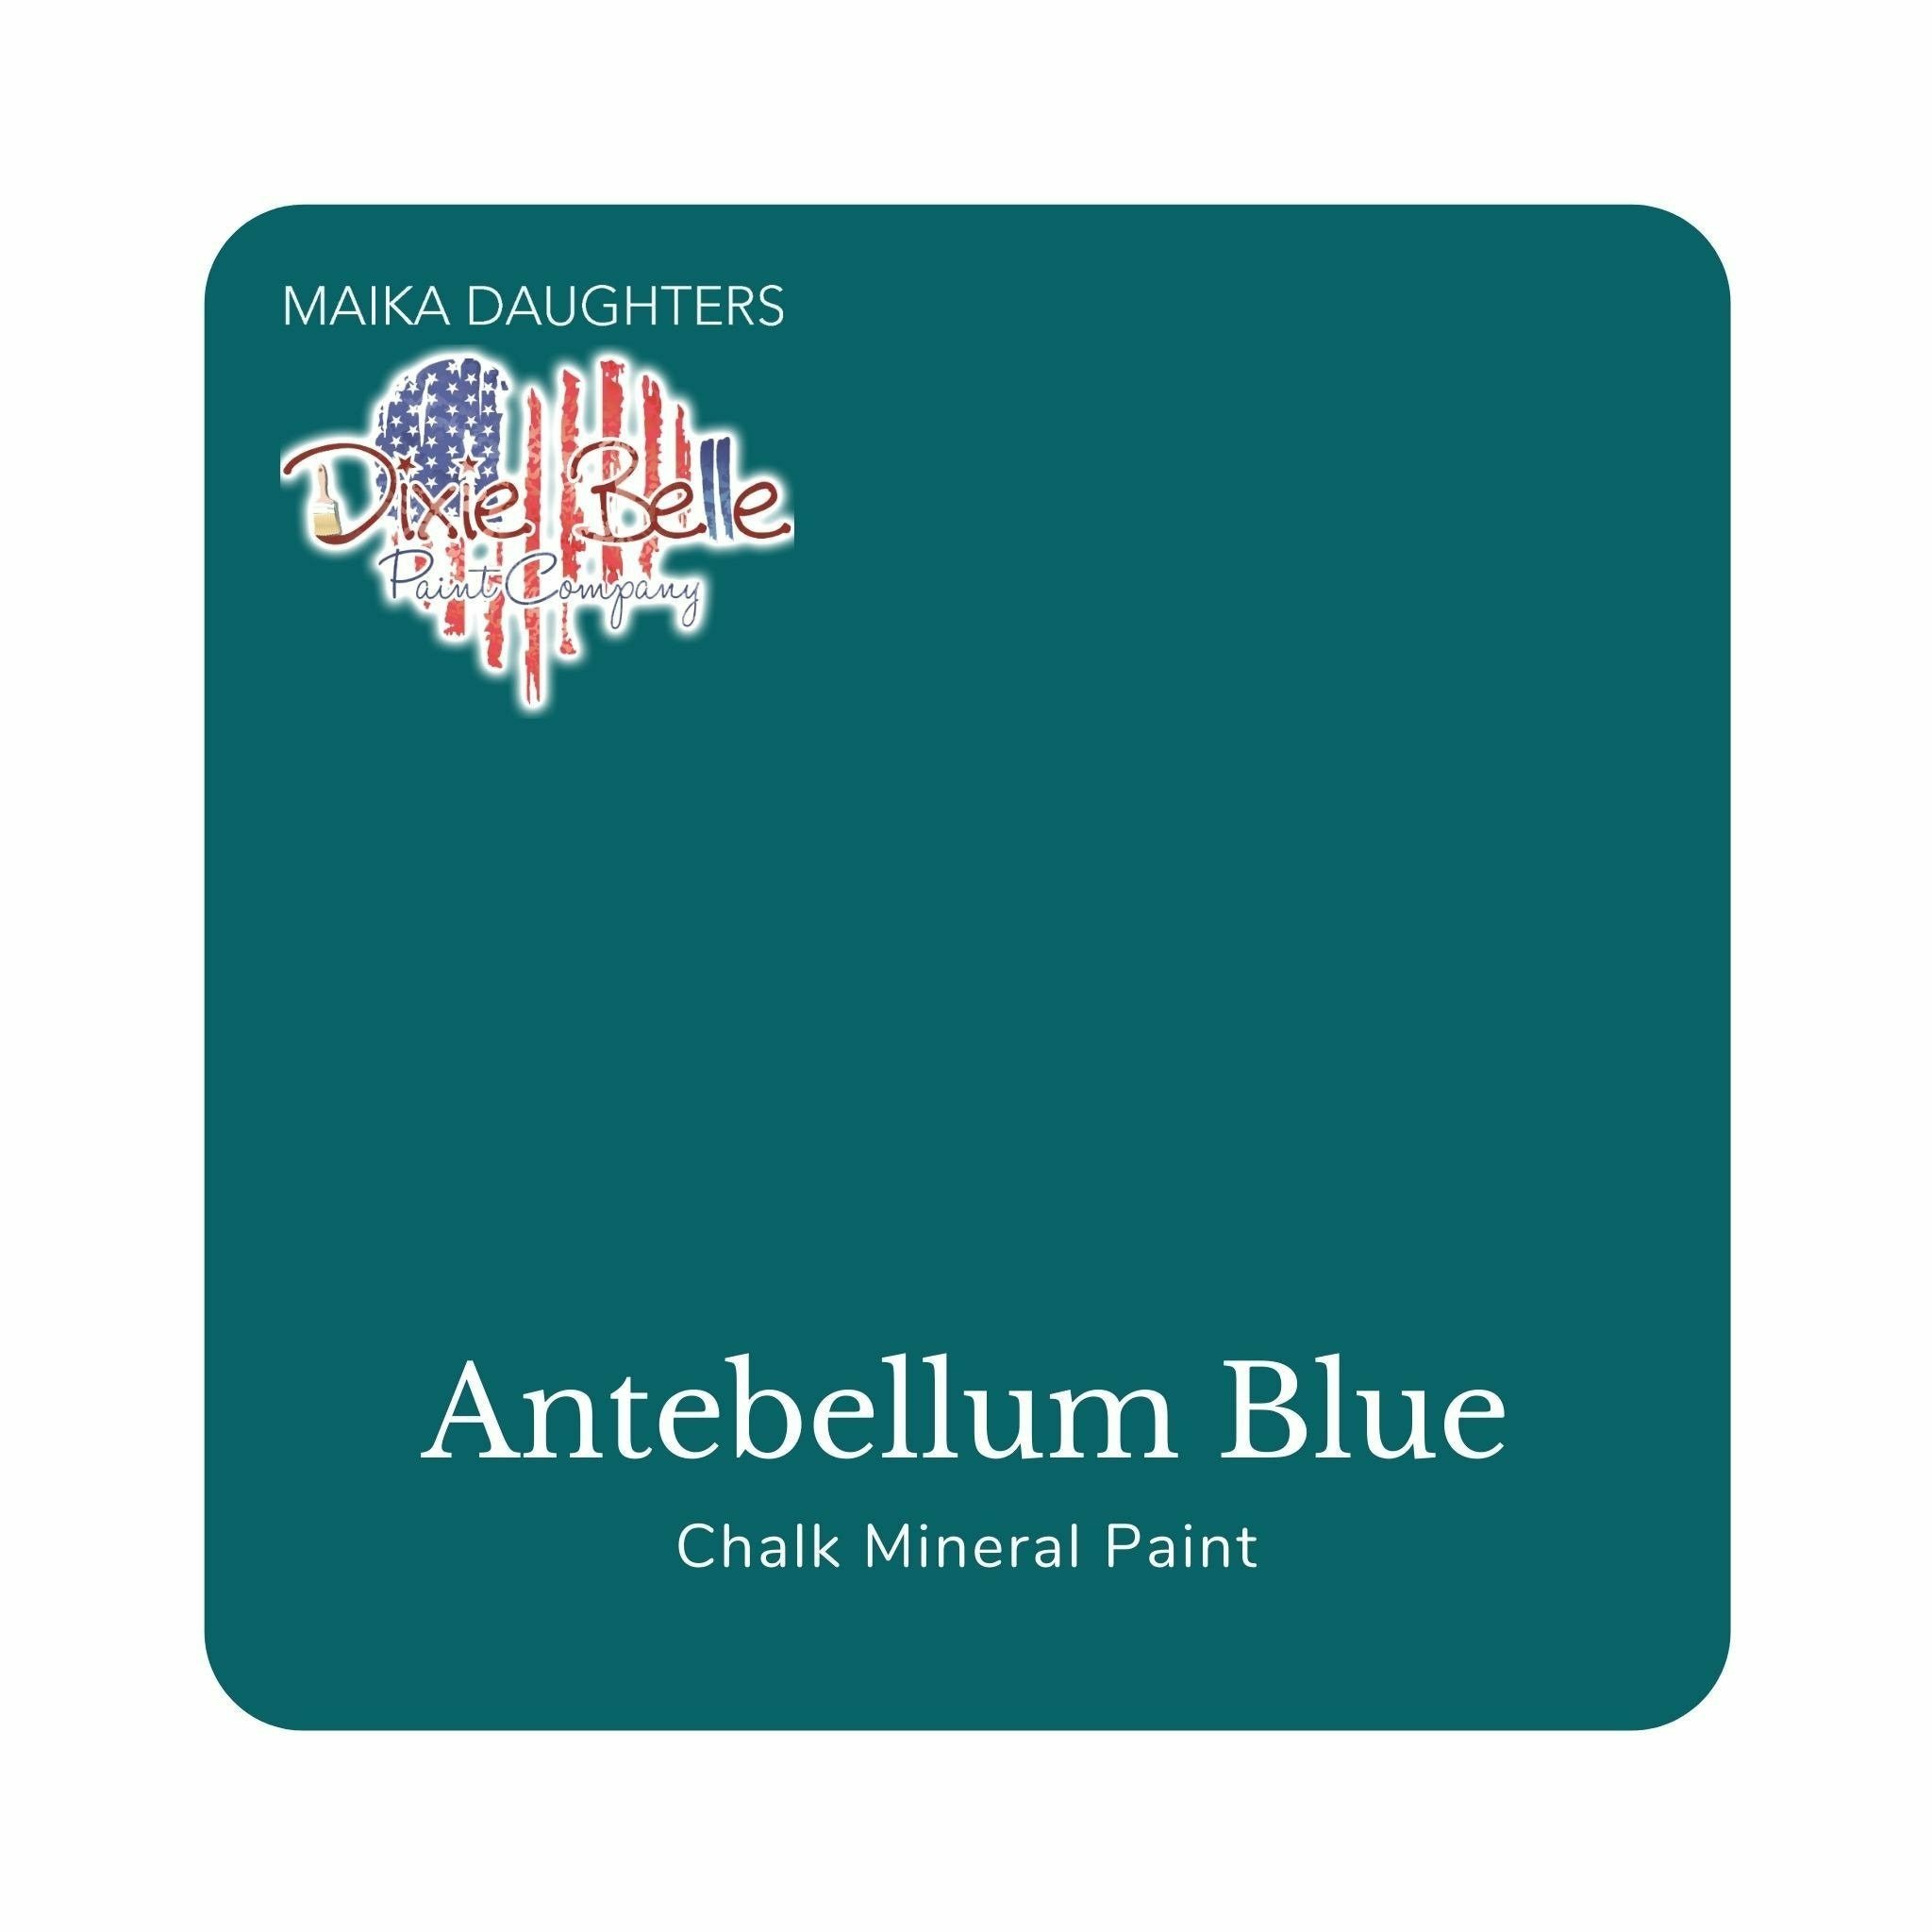 A square swatch card of Dixie Belle Paint Company’s Antebellum Blue Chalk Mineral Paint is against a white background. This color is a rich dark teal.